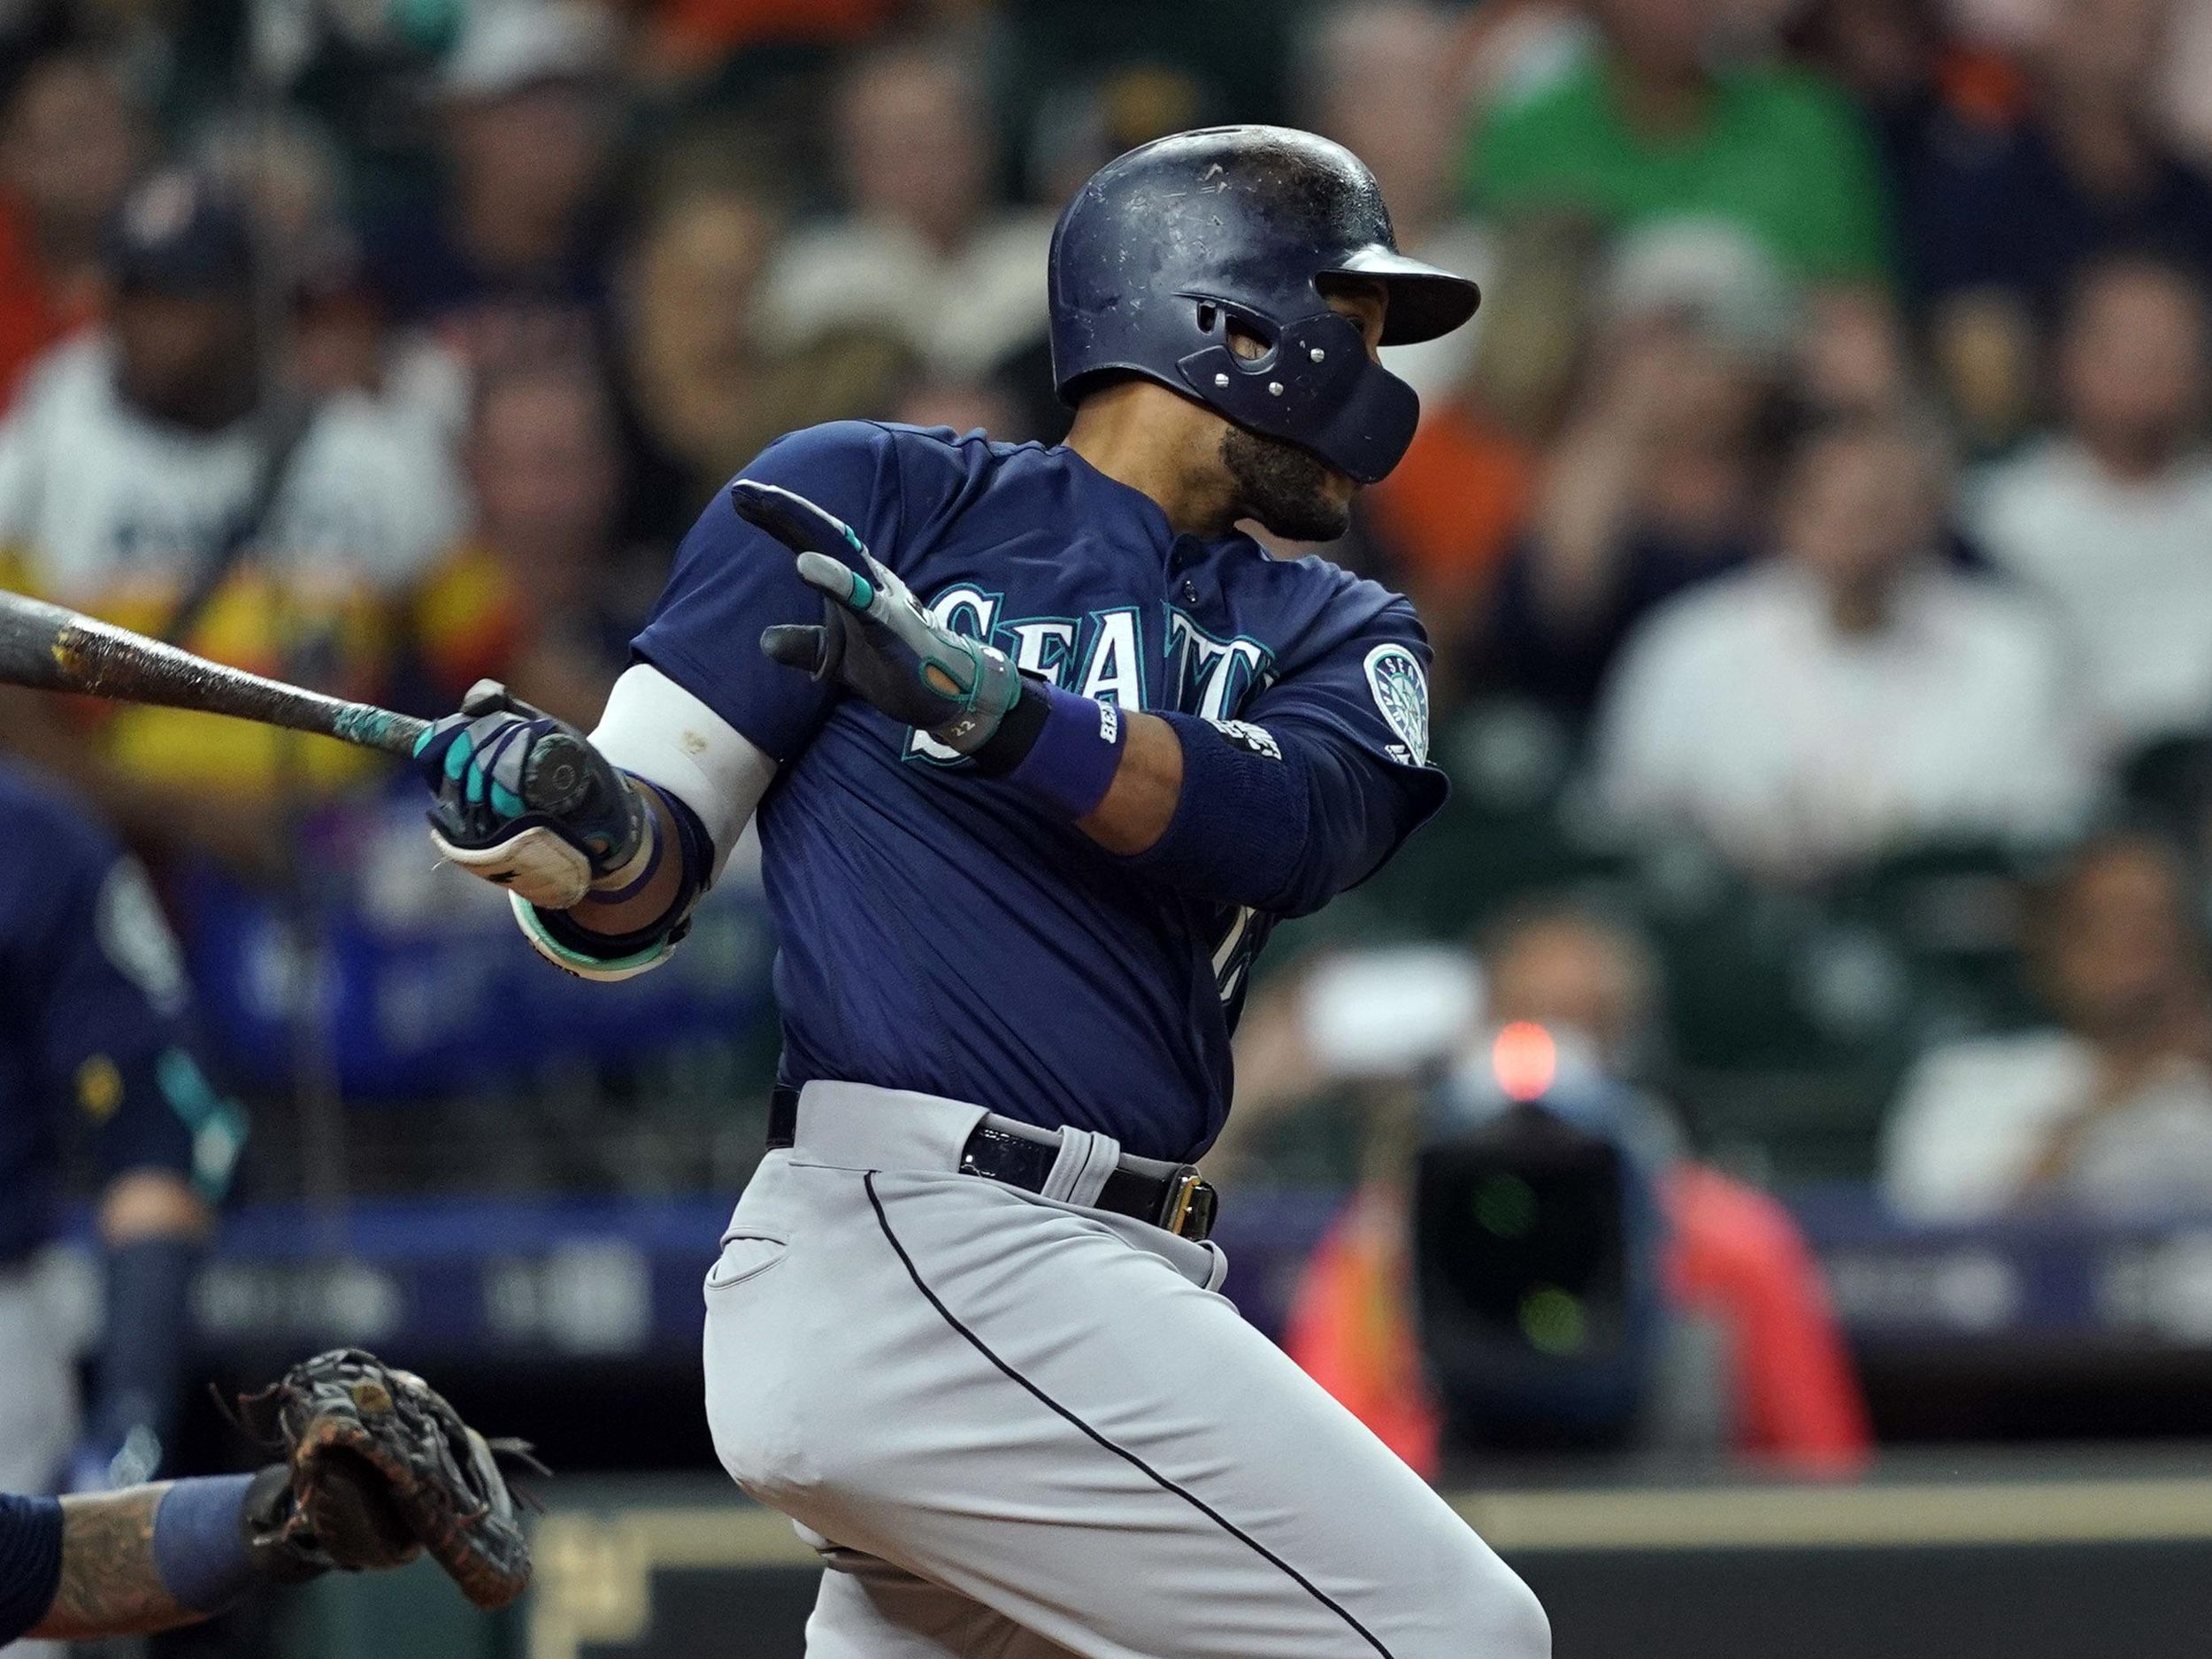 Mets Announce Acquisition Of Robinson Cano, Edwin Diaz - MLB Trade